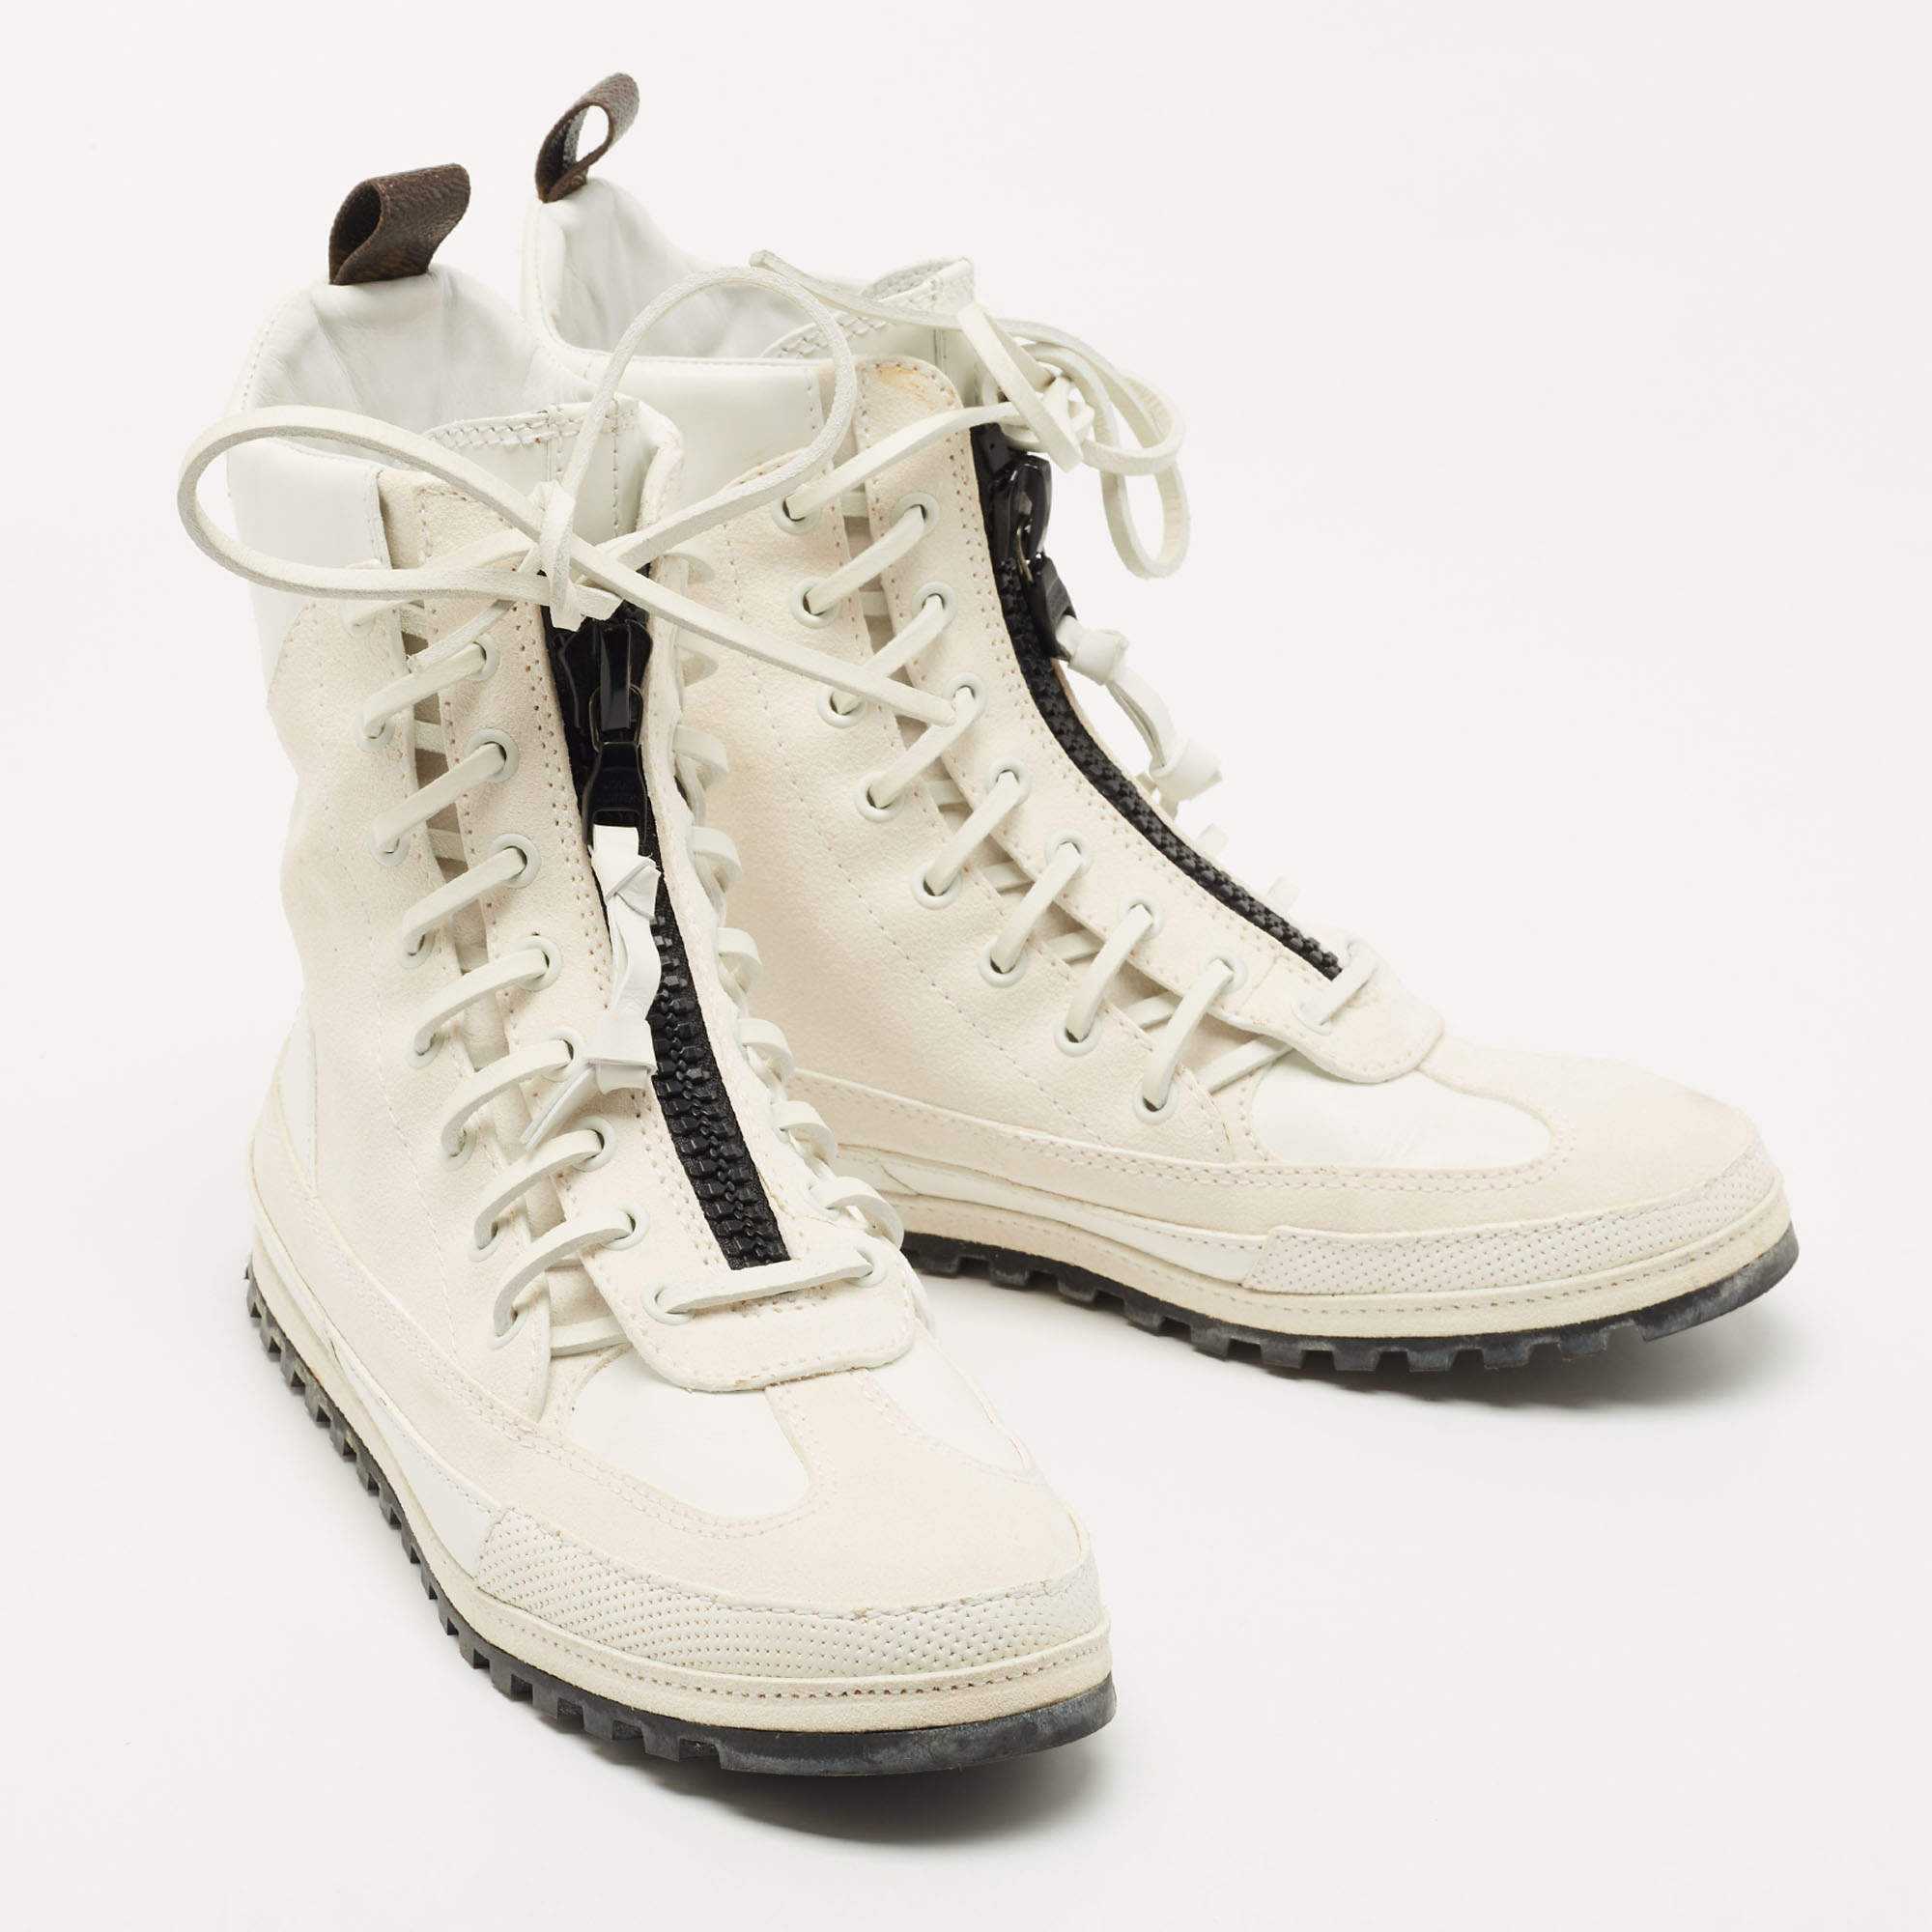 Louis Vuitton White/Cream Suede and Leather High Top Sneakers Size 38.5 Louis  Vuitton